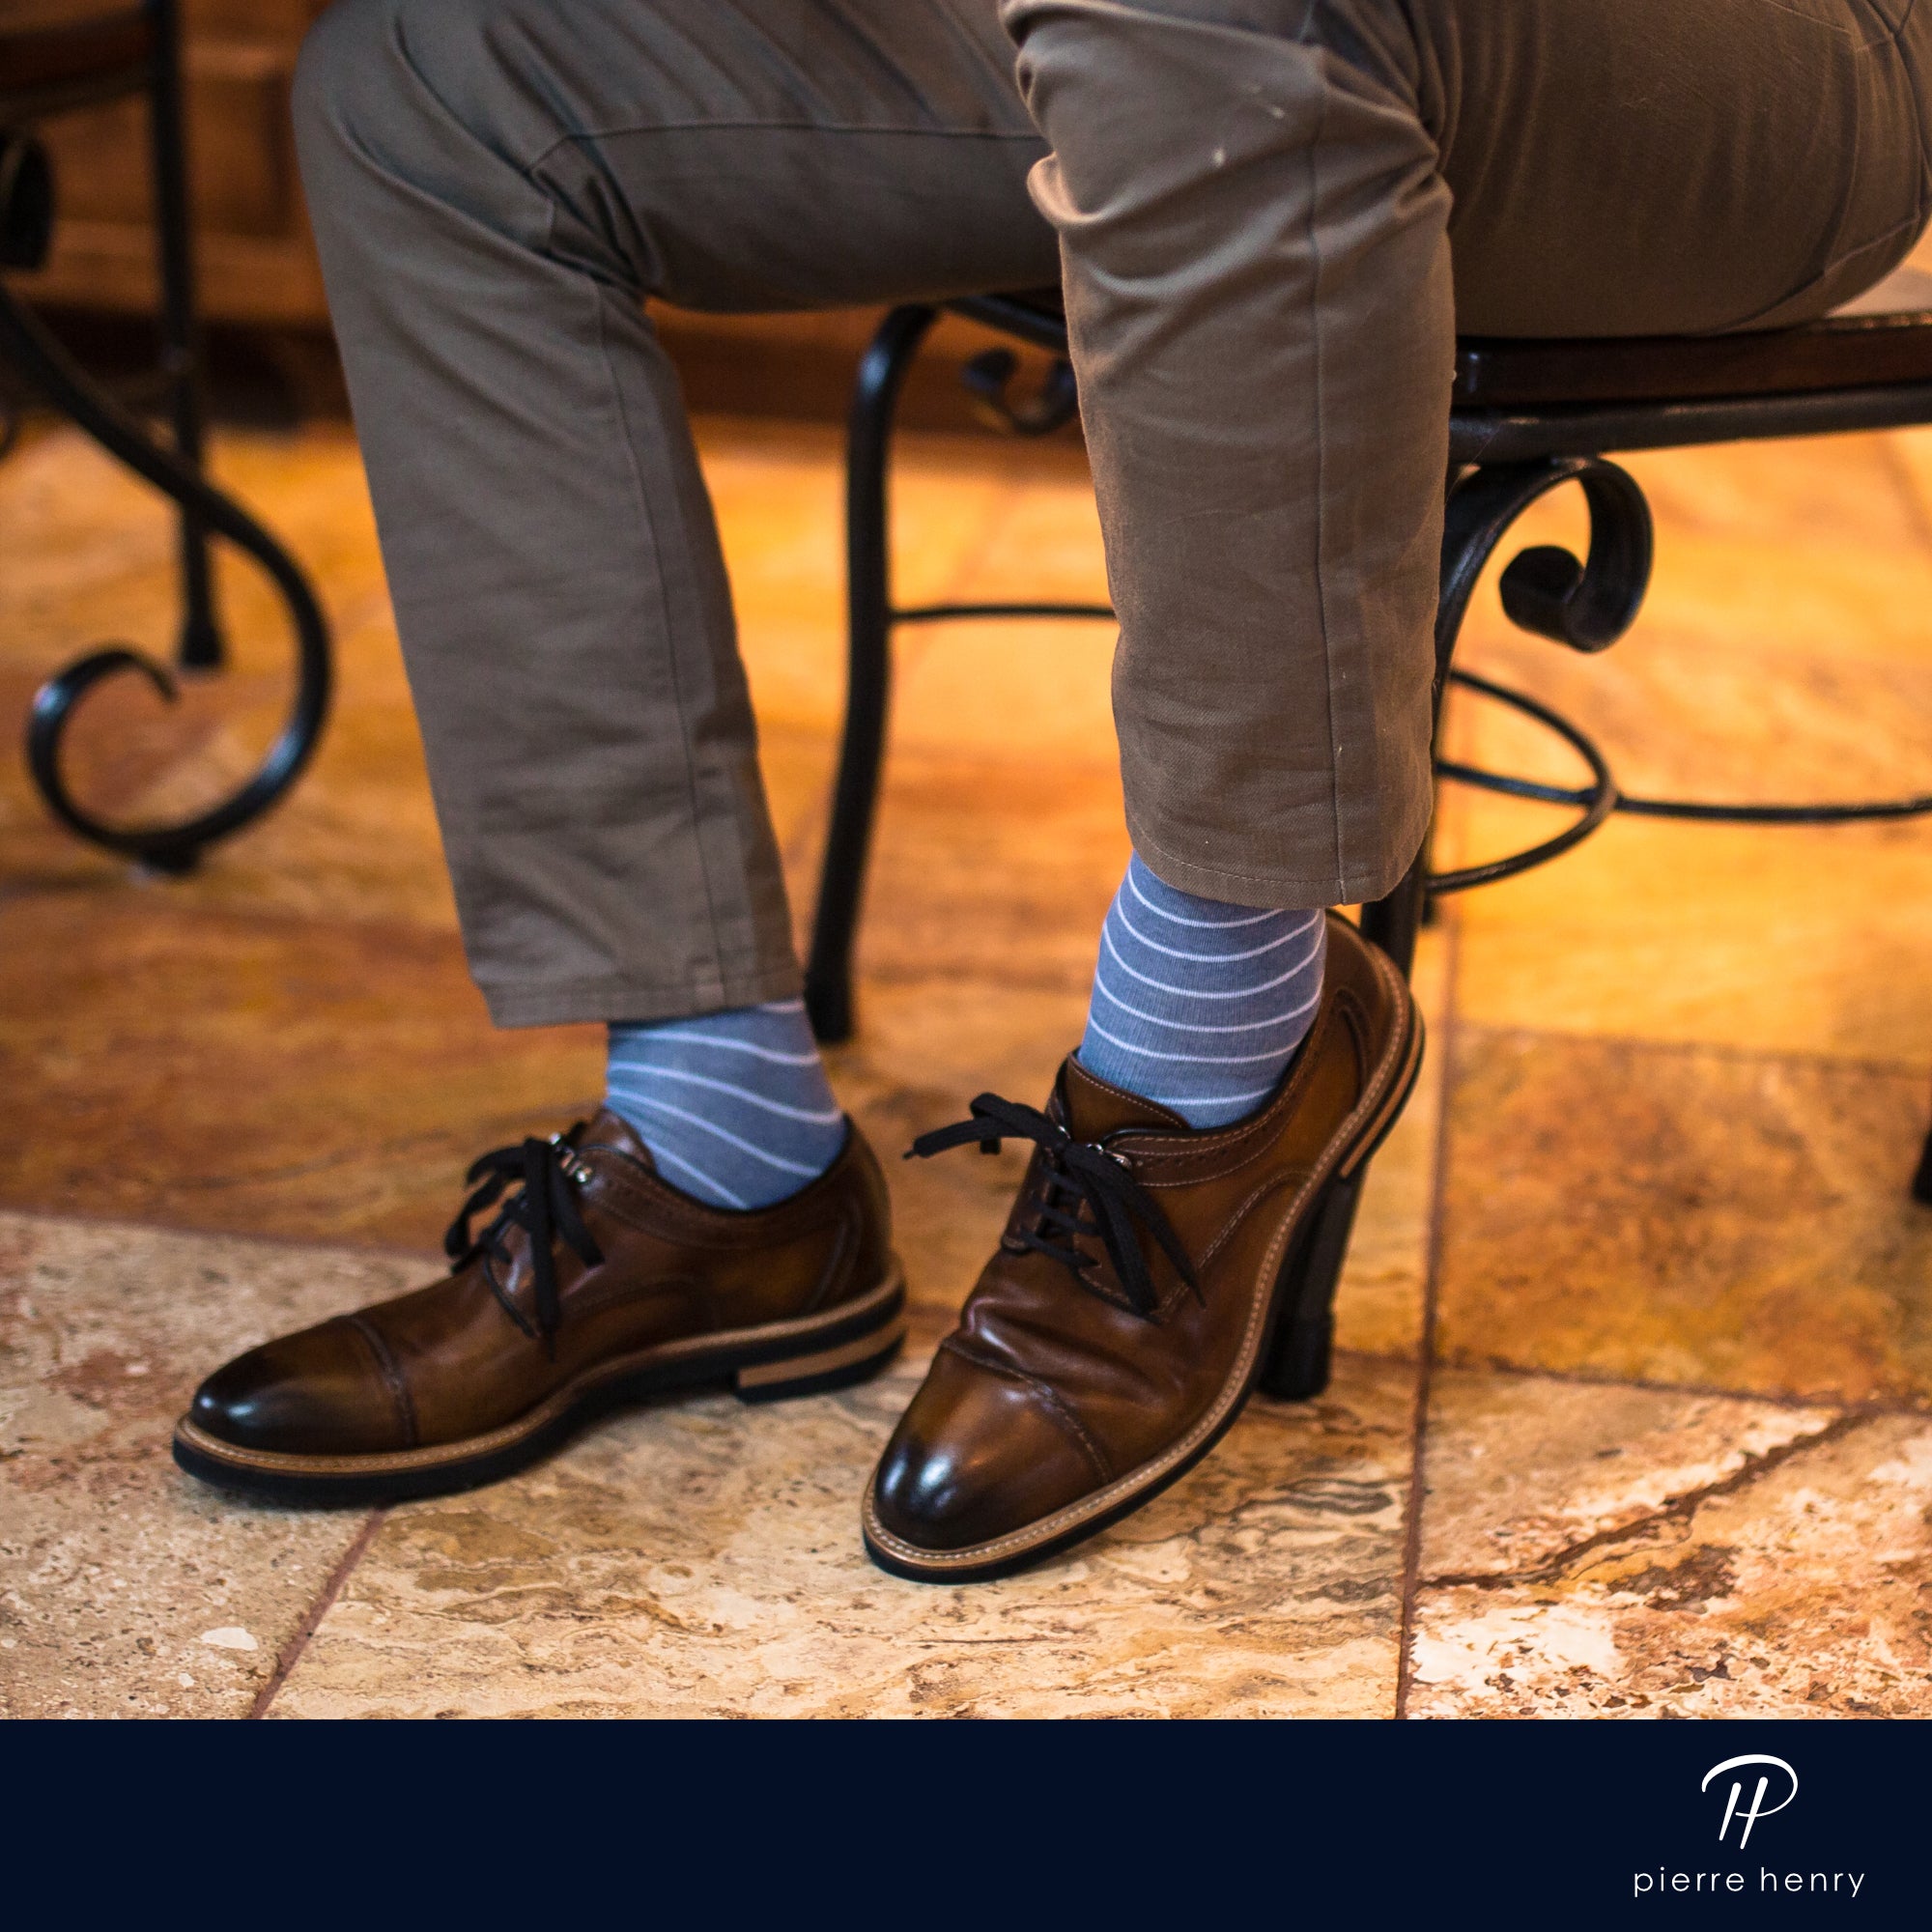 blue over the calf dress socks with light grey stripes, brown dress shoes with black laces, beige pants